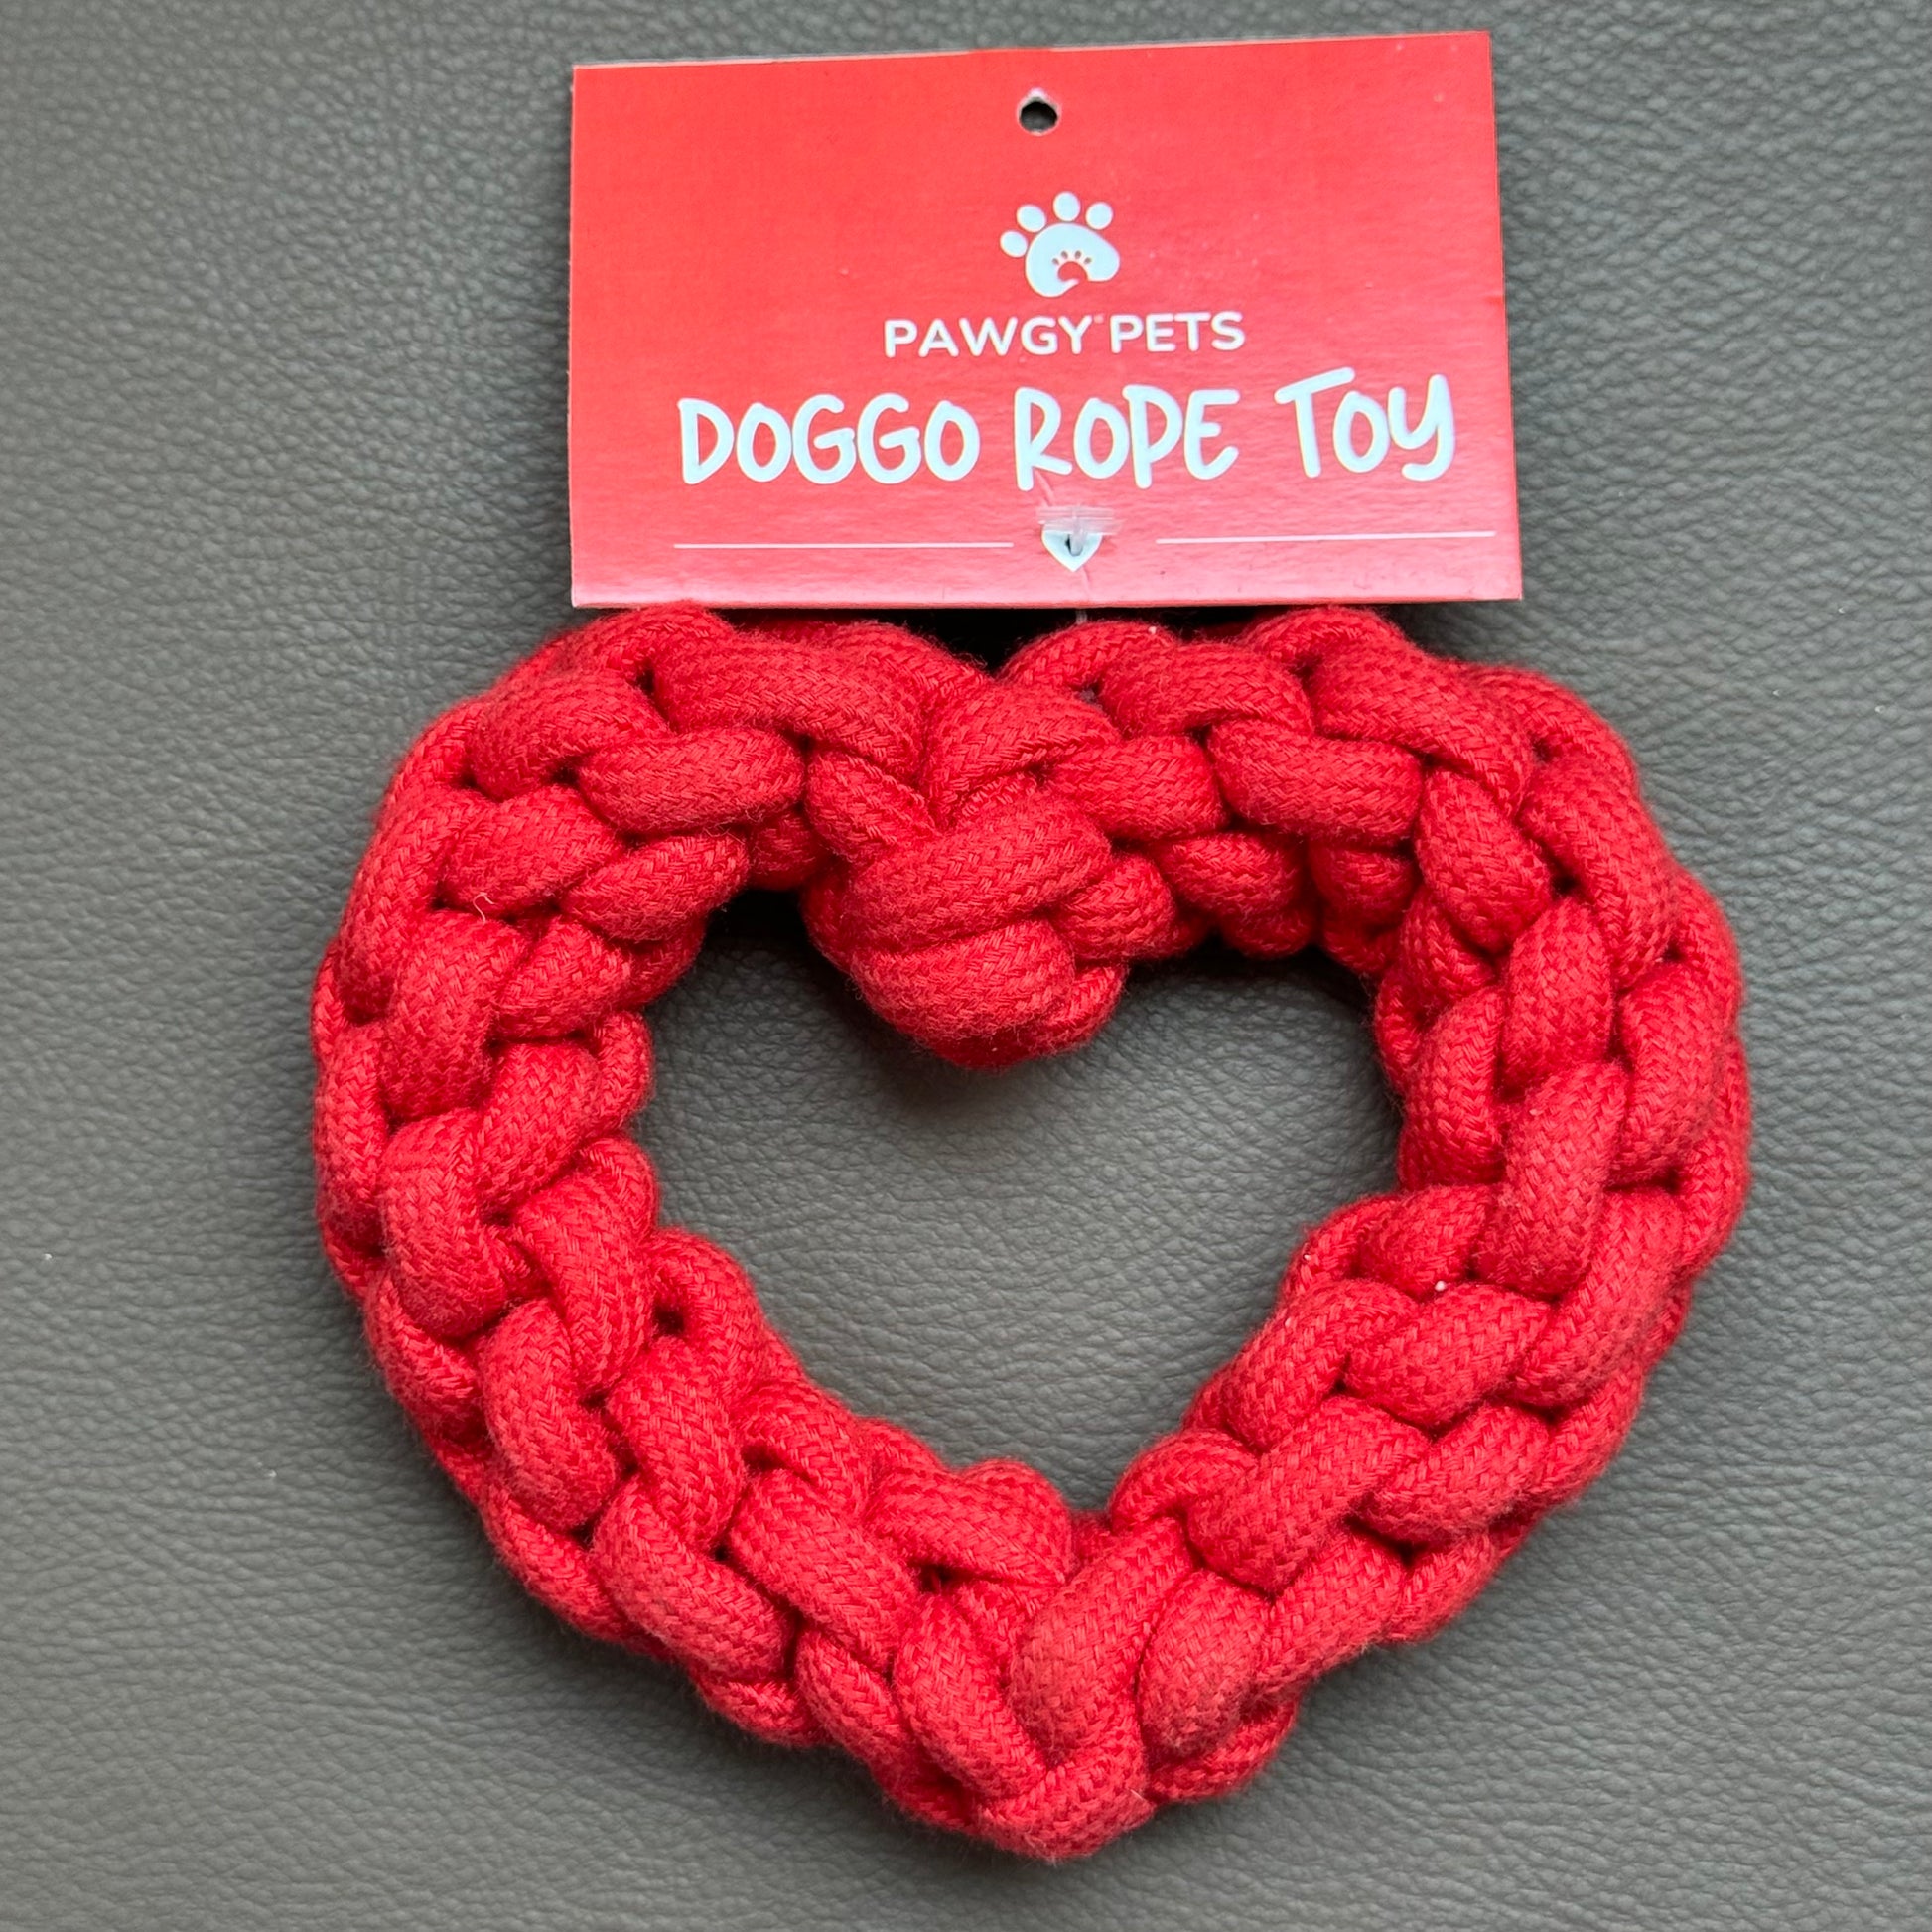 Pawgy Pets Heart Rope Toy for Dogs